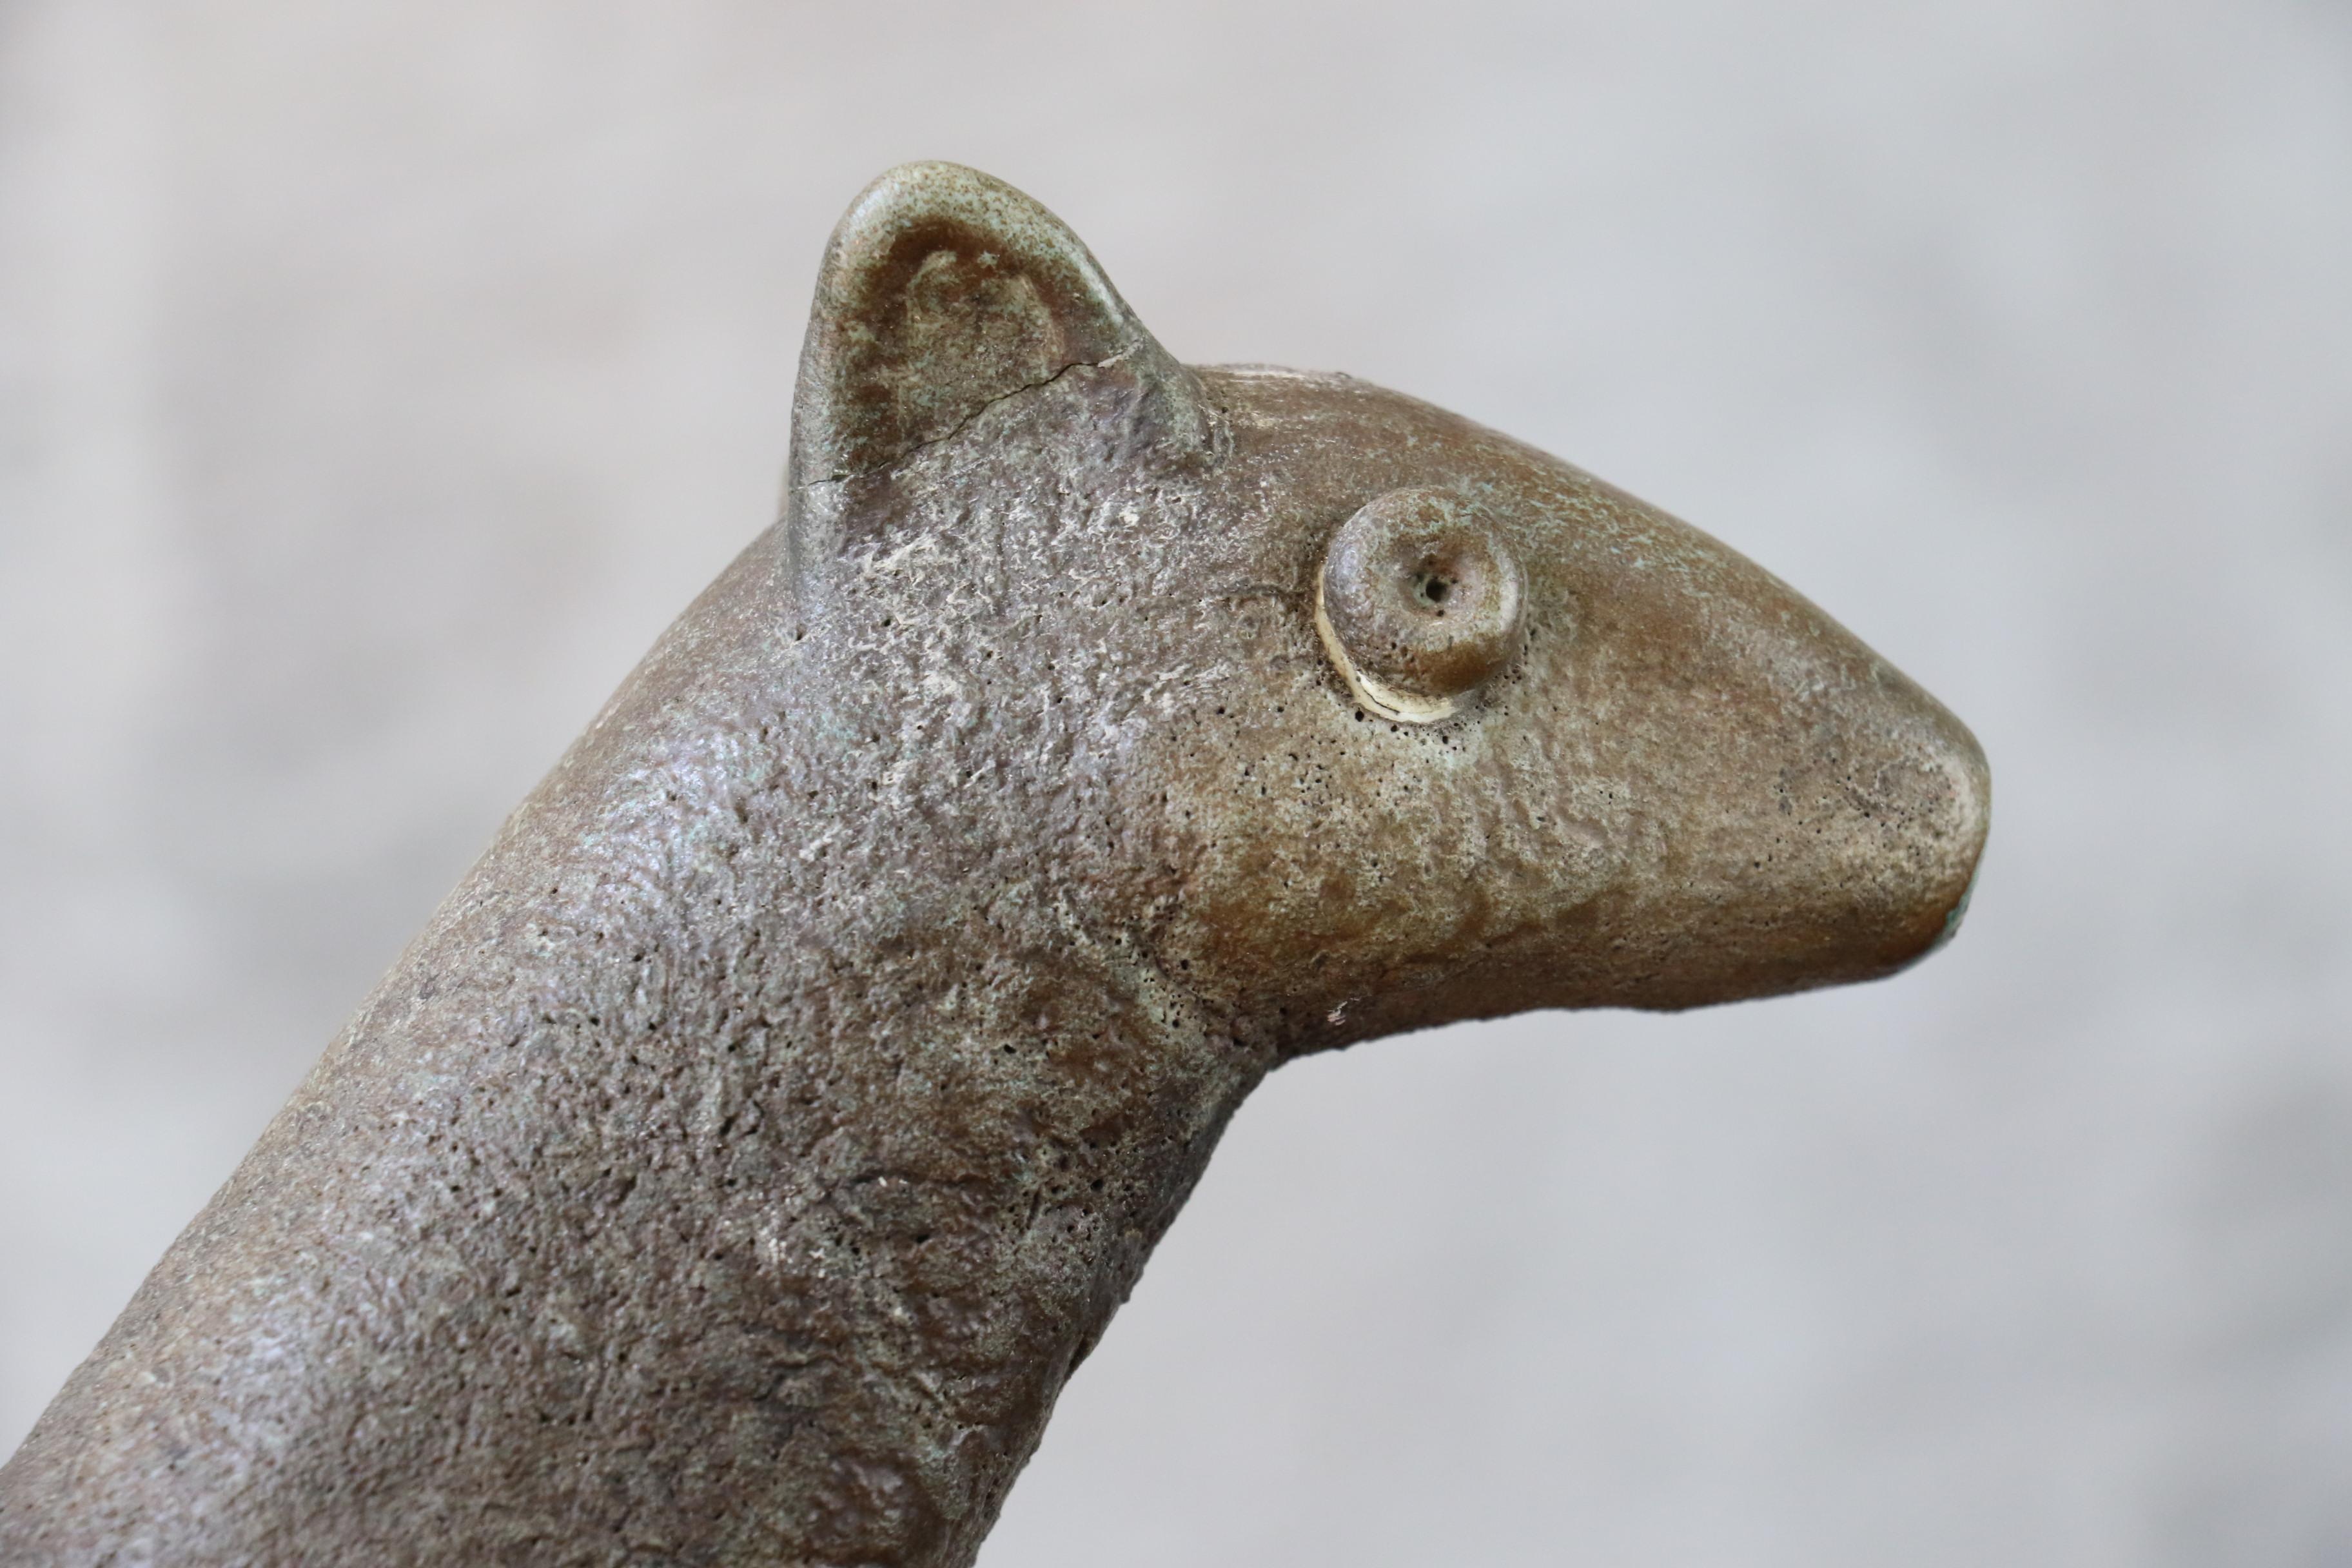 Zoomorphic Mid-century ceramic signed by René Maurel, era Jouve, Blin In Fair Condition For Sale In Camblanes et Meynac, FR